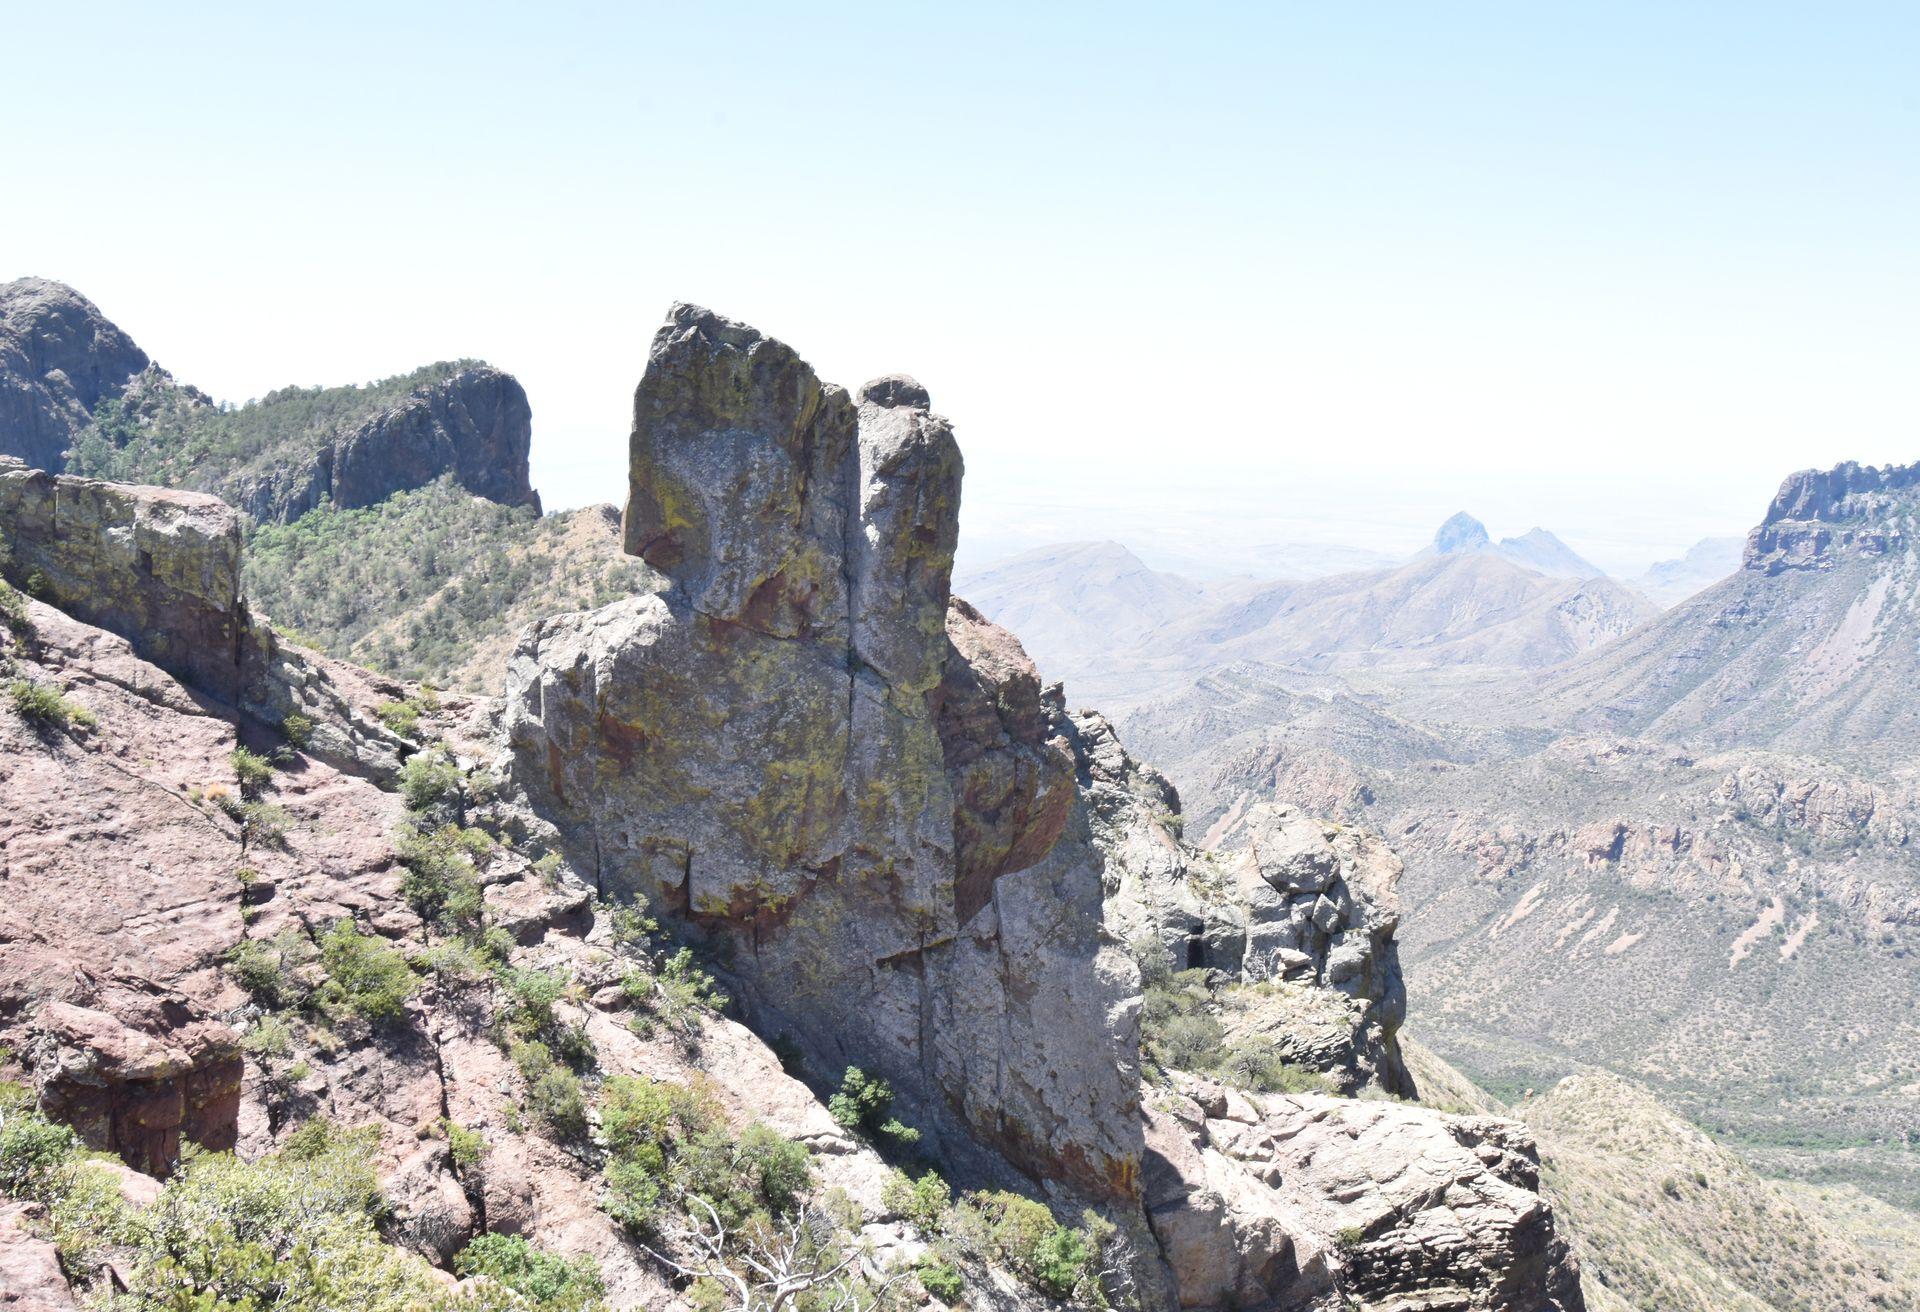 A mountain view from the Lost Mine Trail in Big Bend National Park.